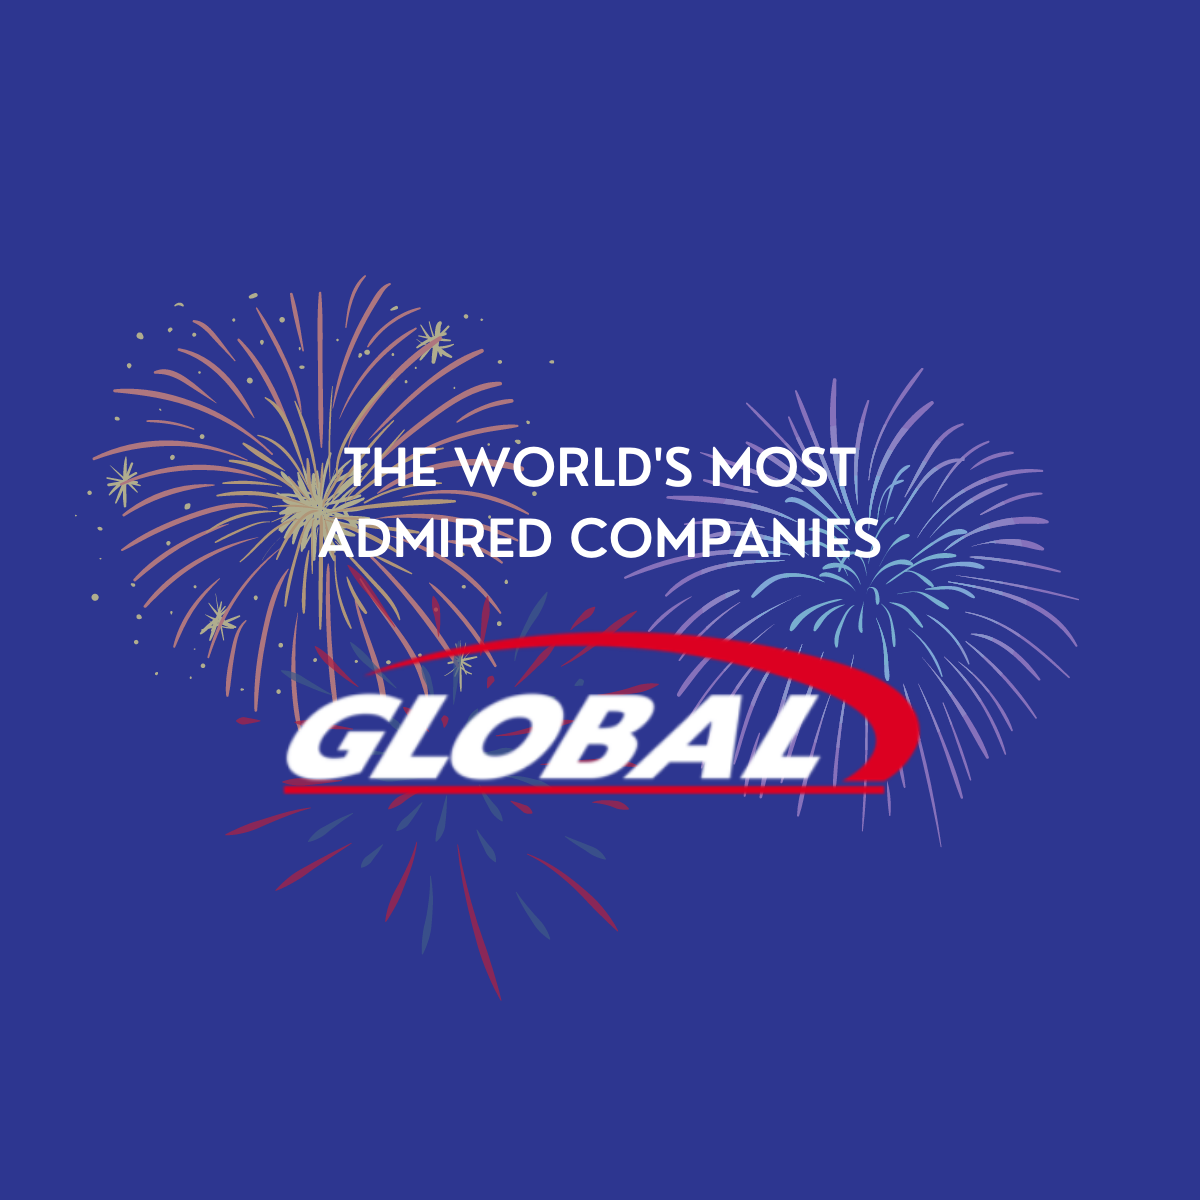 Global Partners Named to Fortune’s World’s Most Admired Companies List